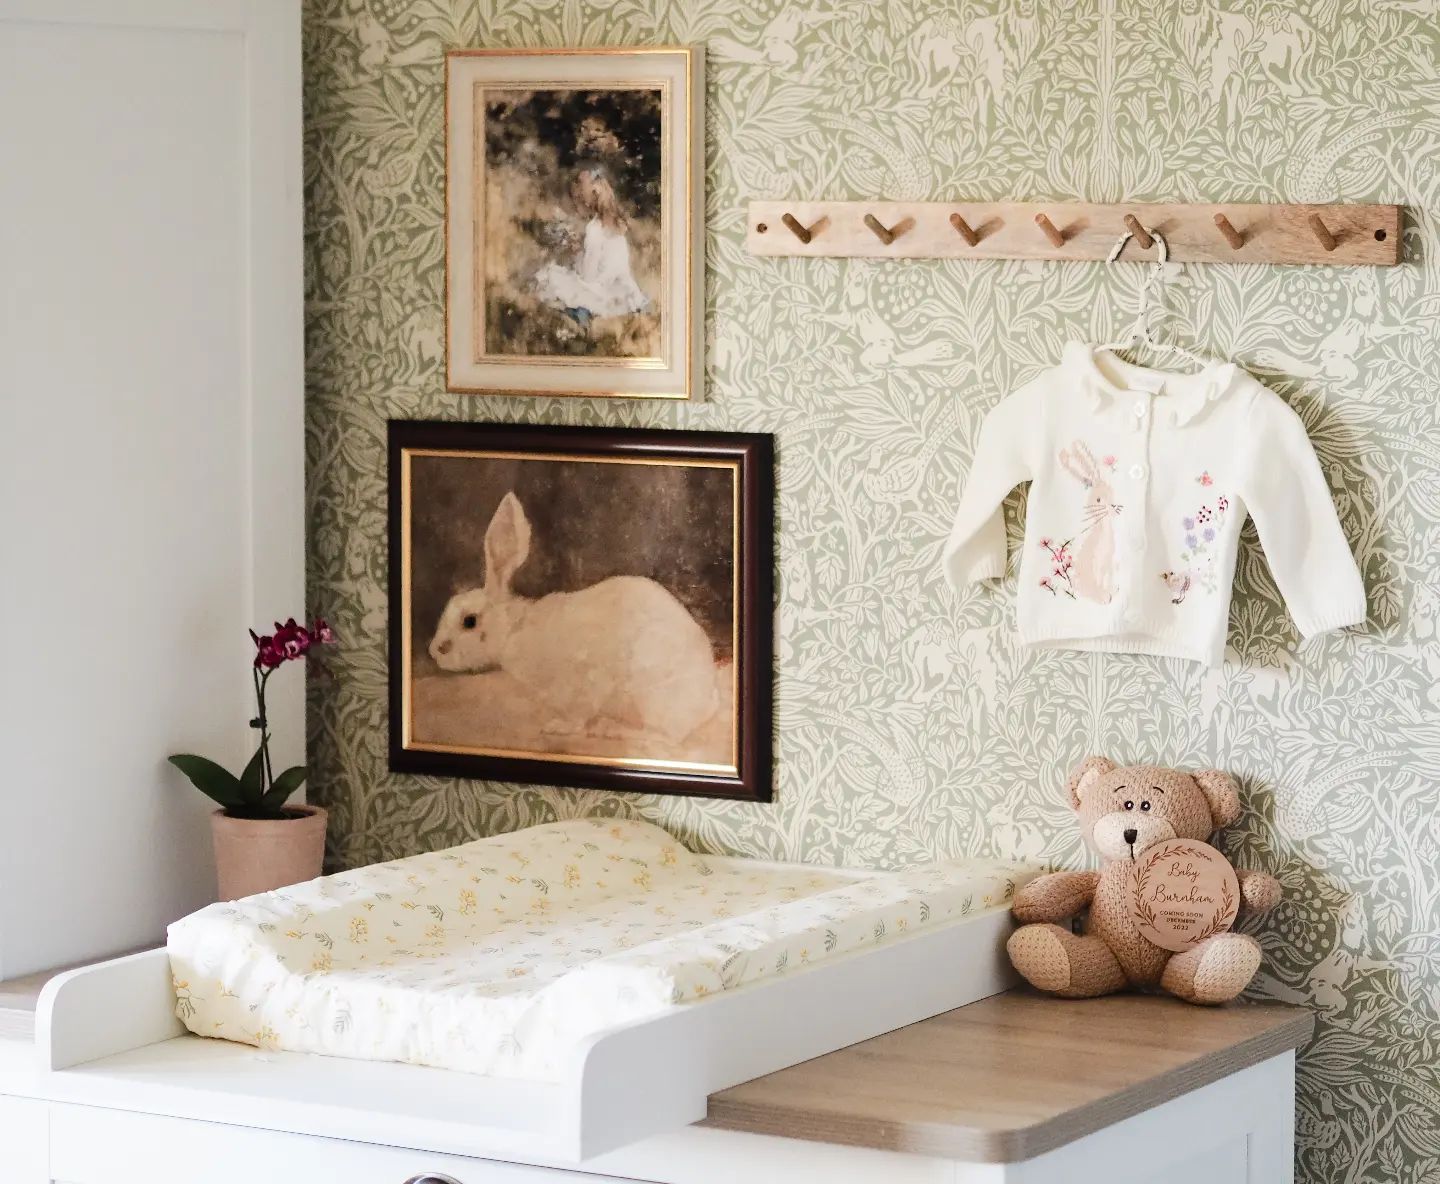 A sage green nursery with framed pictures.